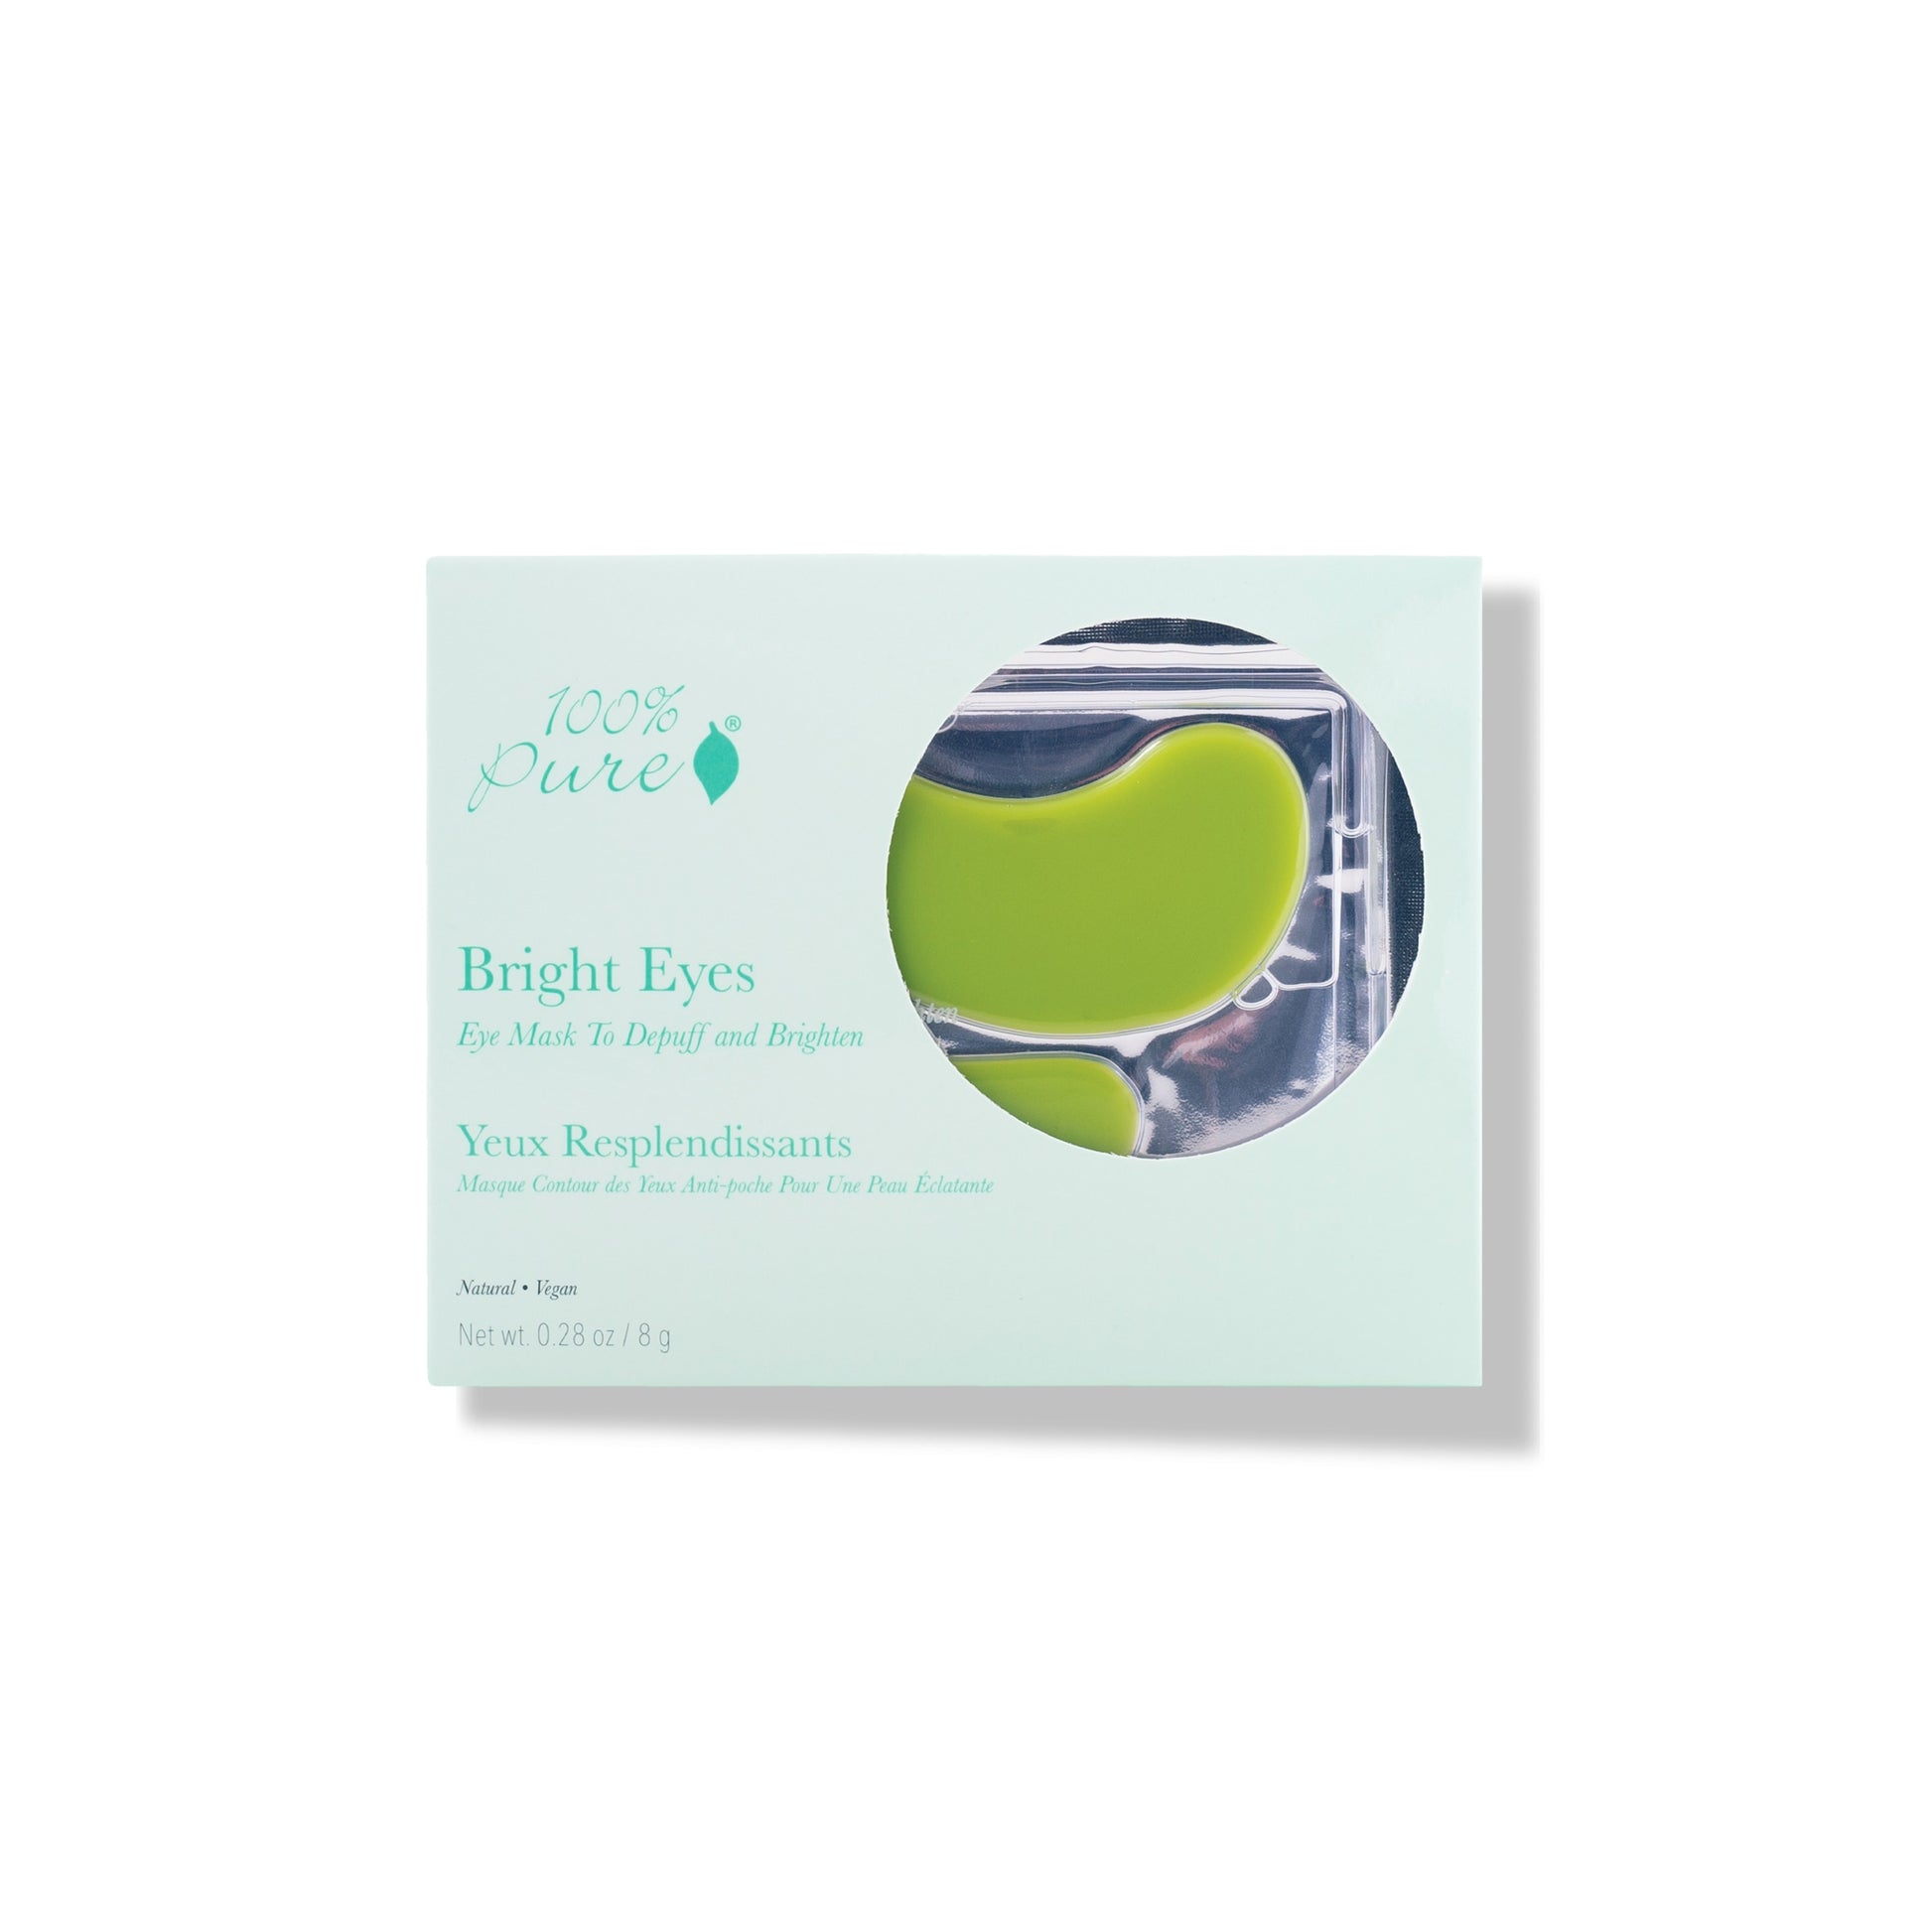 100% PURE Bright Eyes Mask 5 pack